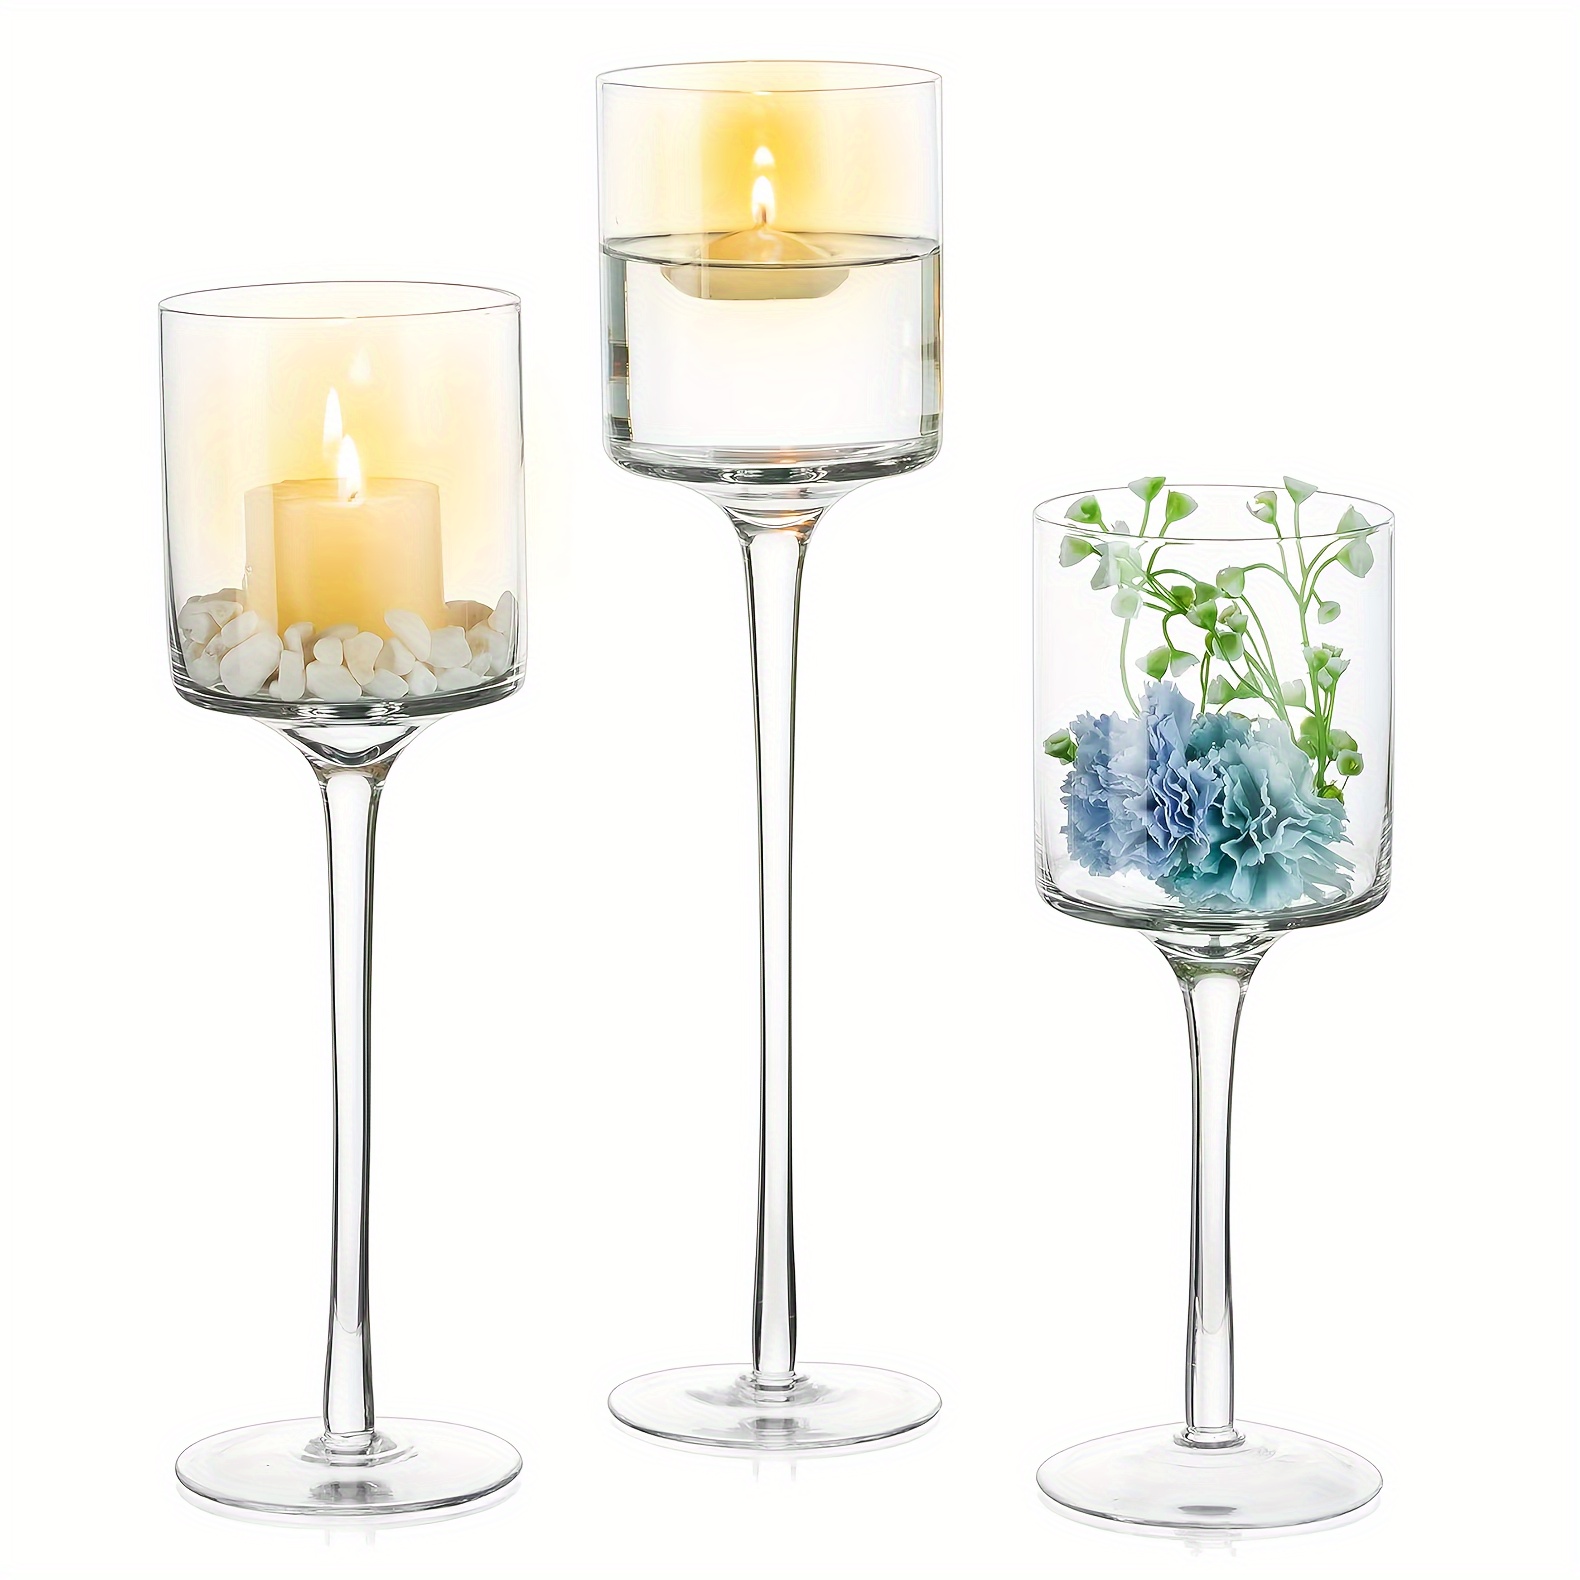 

3-piece Set Glass Candle Holders For Centerpieces, Tall Stemmed Tealight Candlestick Holders For Home, Wedding, Party Table Decor, Transparent Glass, No Electricity Required